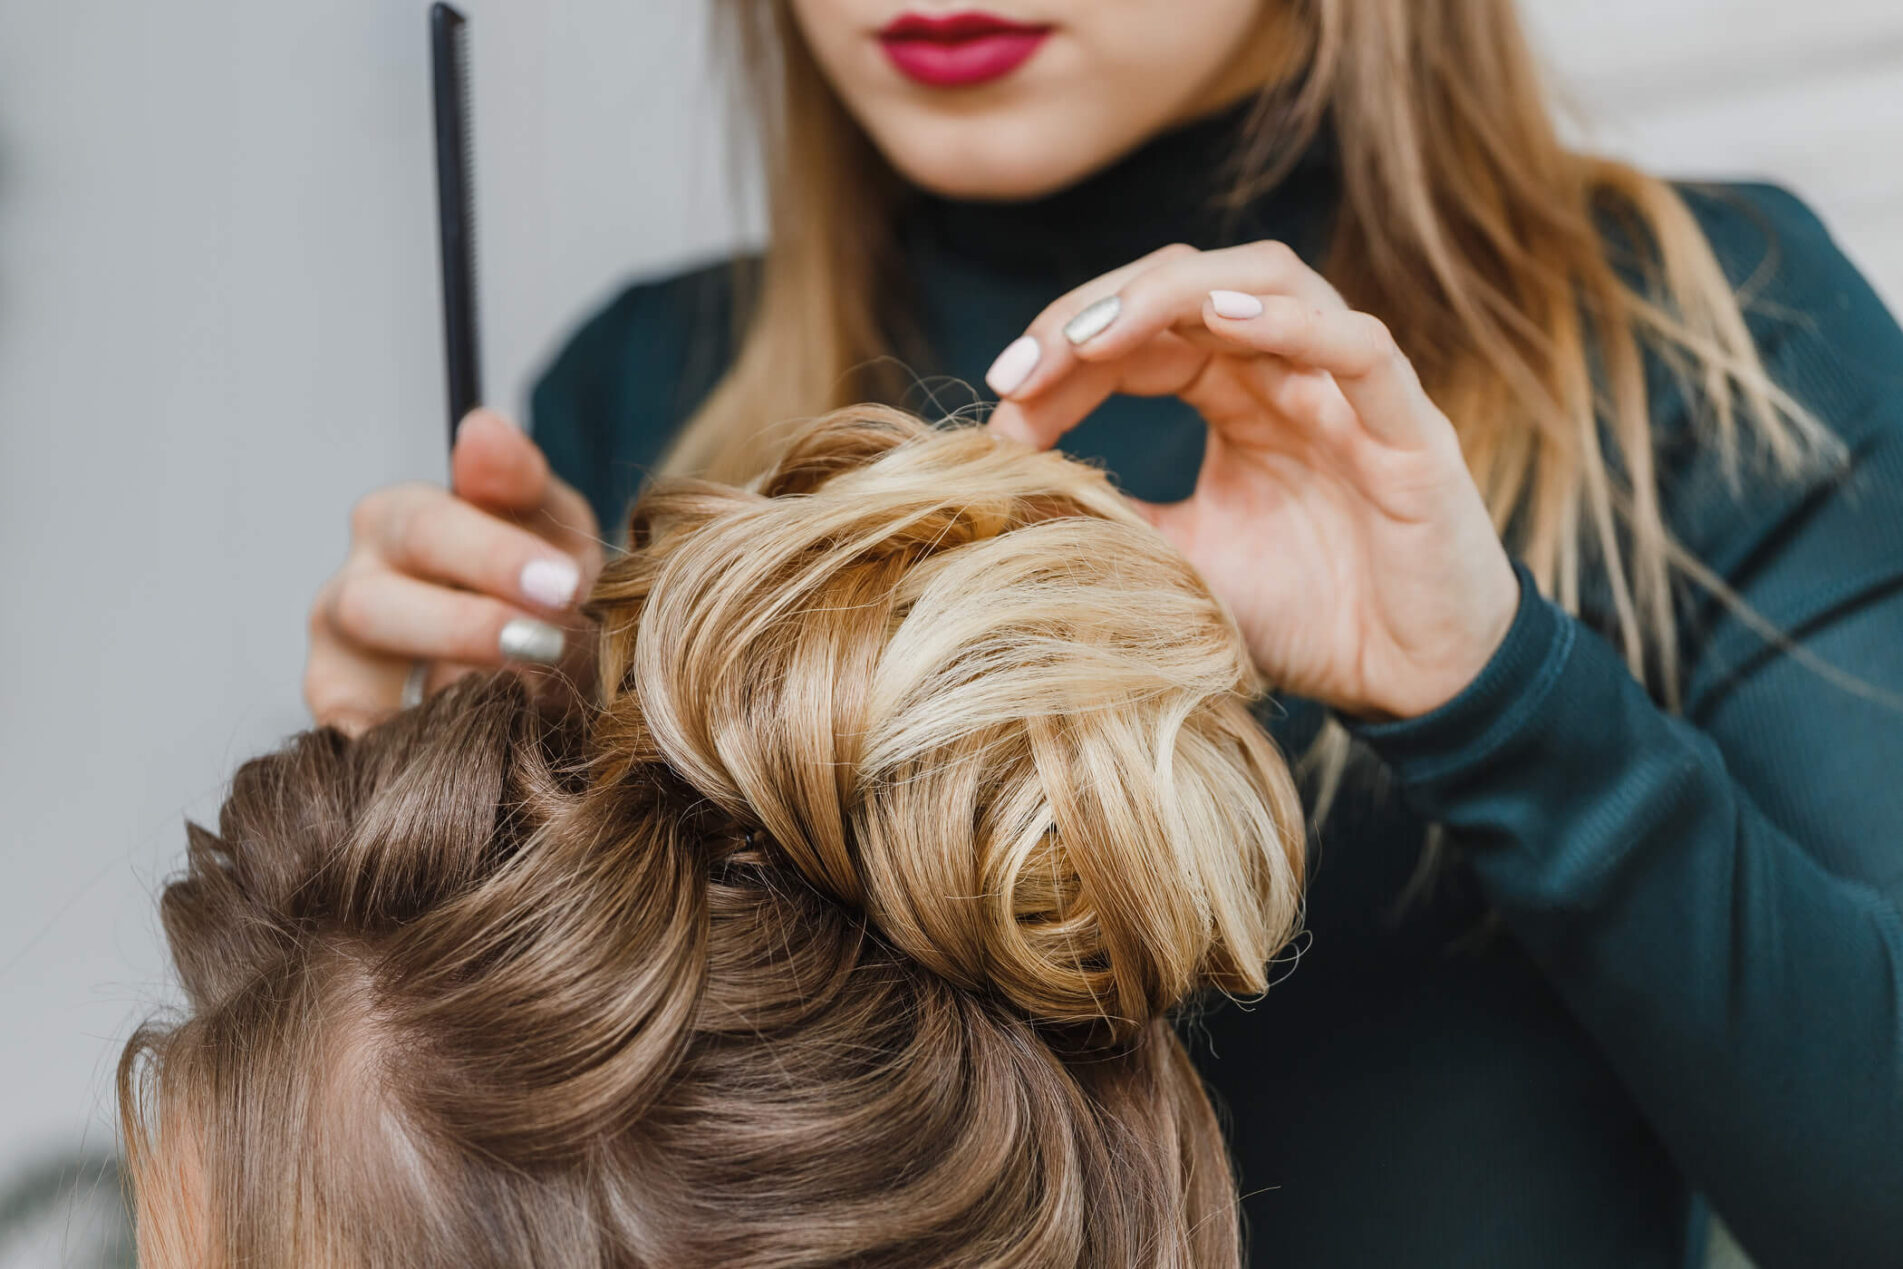 5 messy hairstyles that are actually too stylish to skip